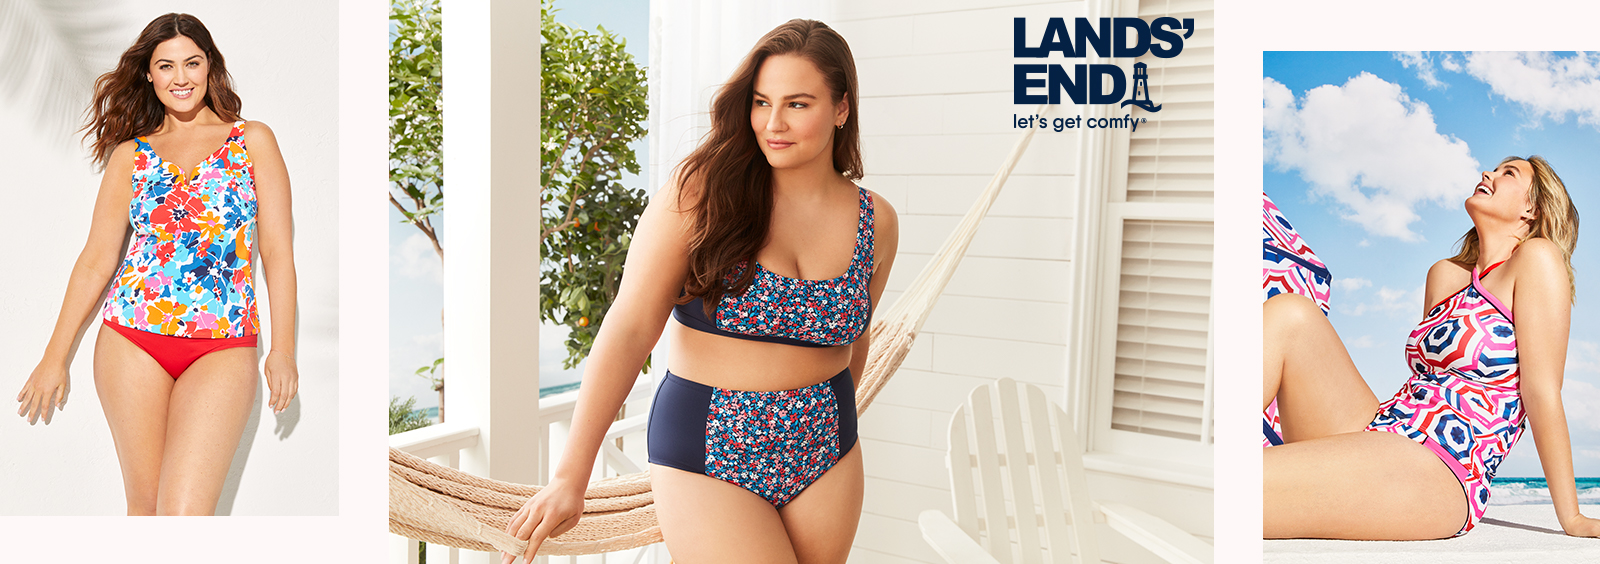 Tips and Tricks for Styling Plus Size Swimwear